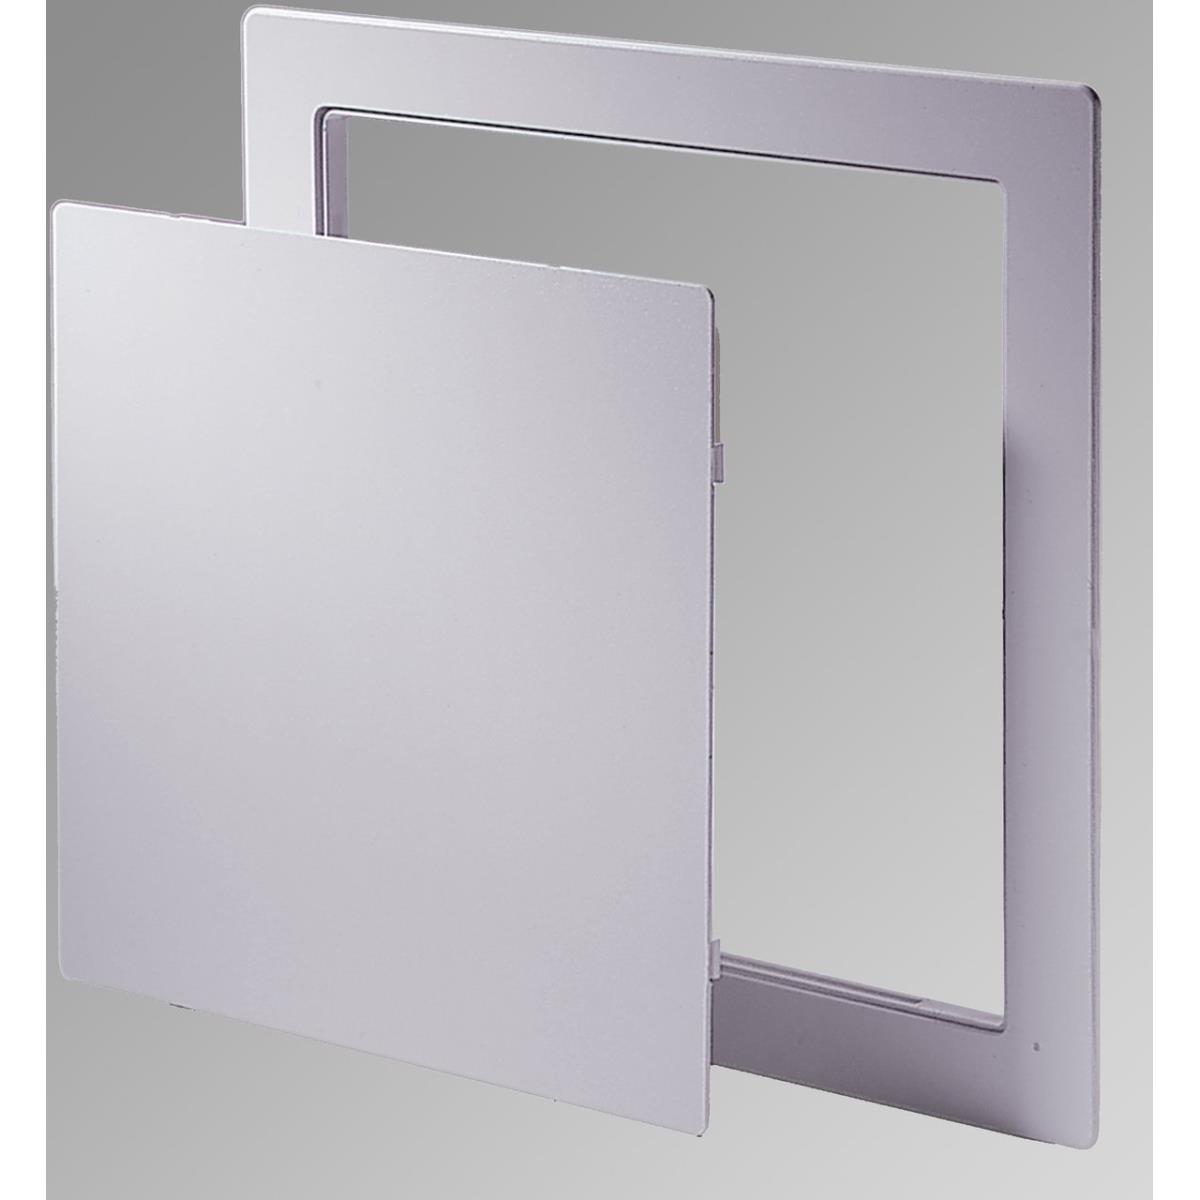 Picture of Acudor PA2424 24 x 24 in. Aluminum Enclosure Back Panel